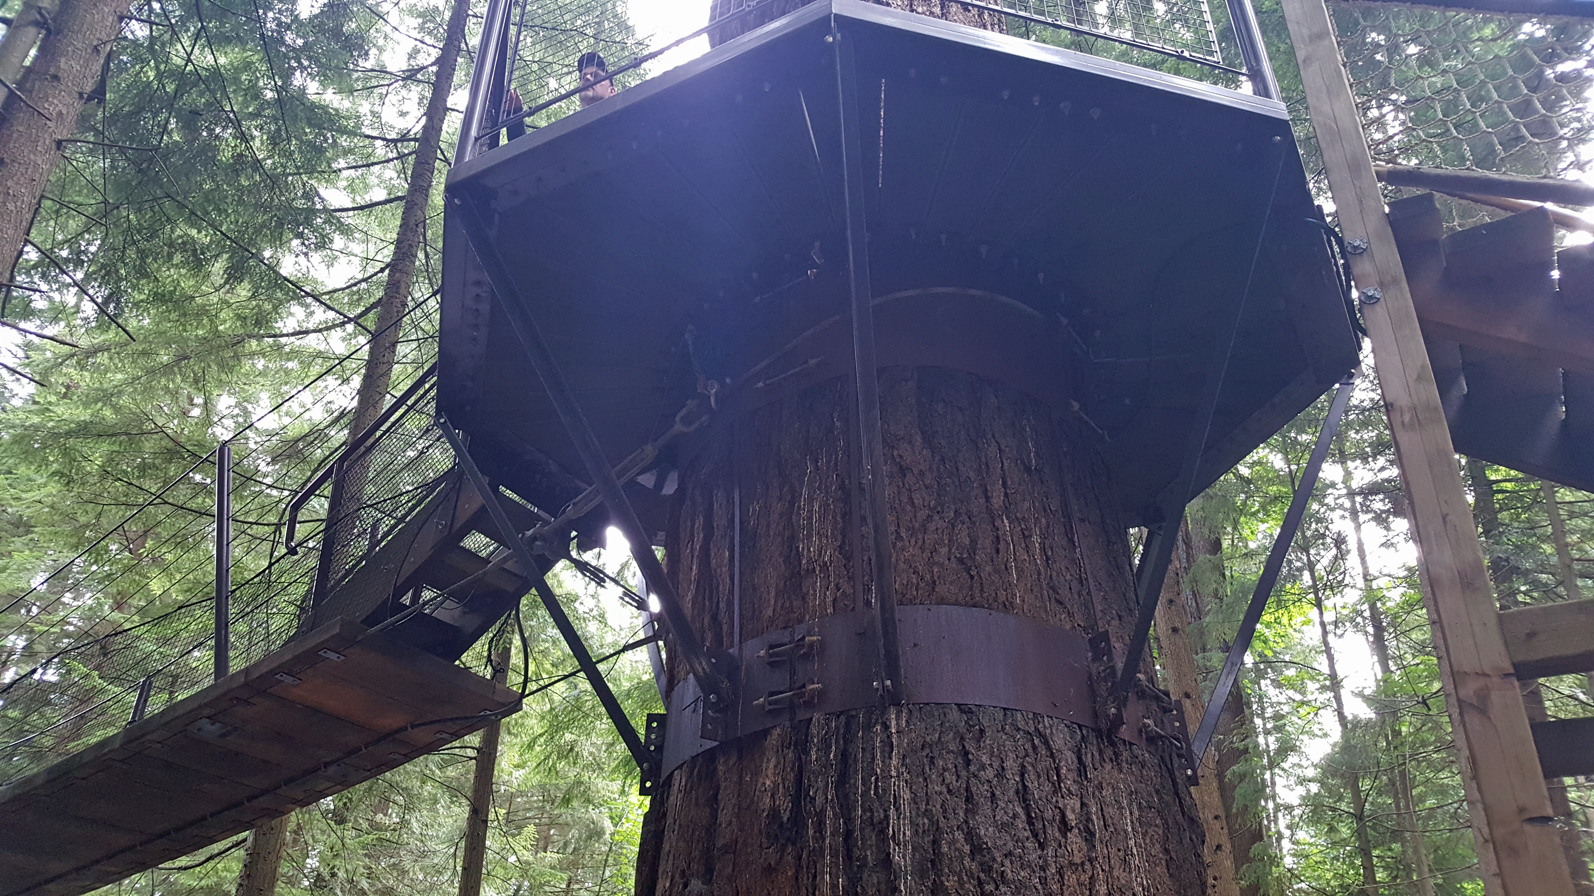 Multi-level treehouse complete w/ wifi and power[building] : architecture